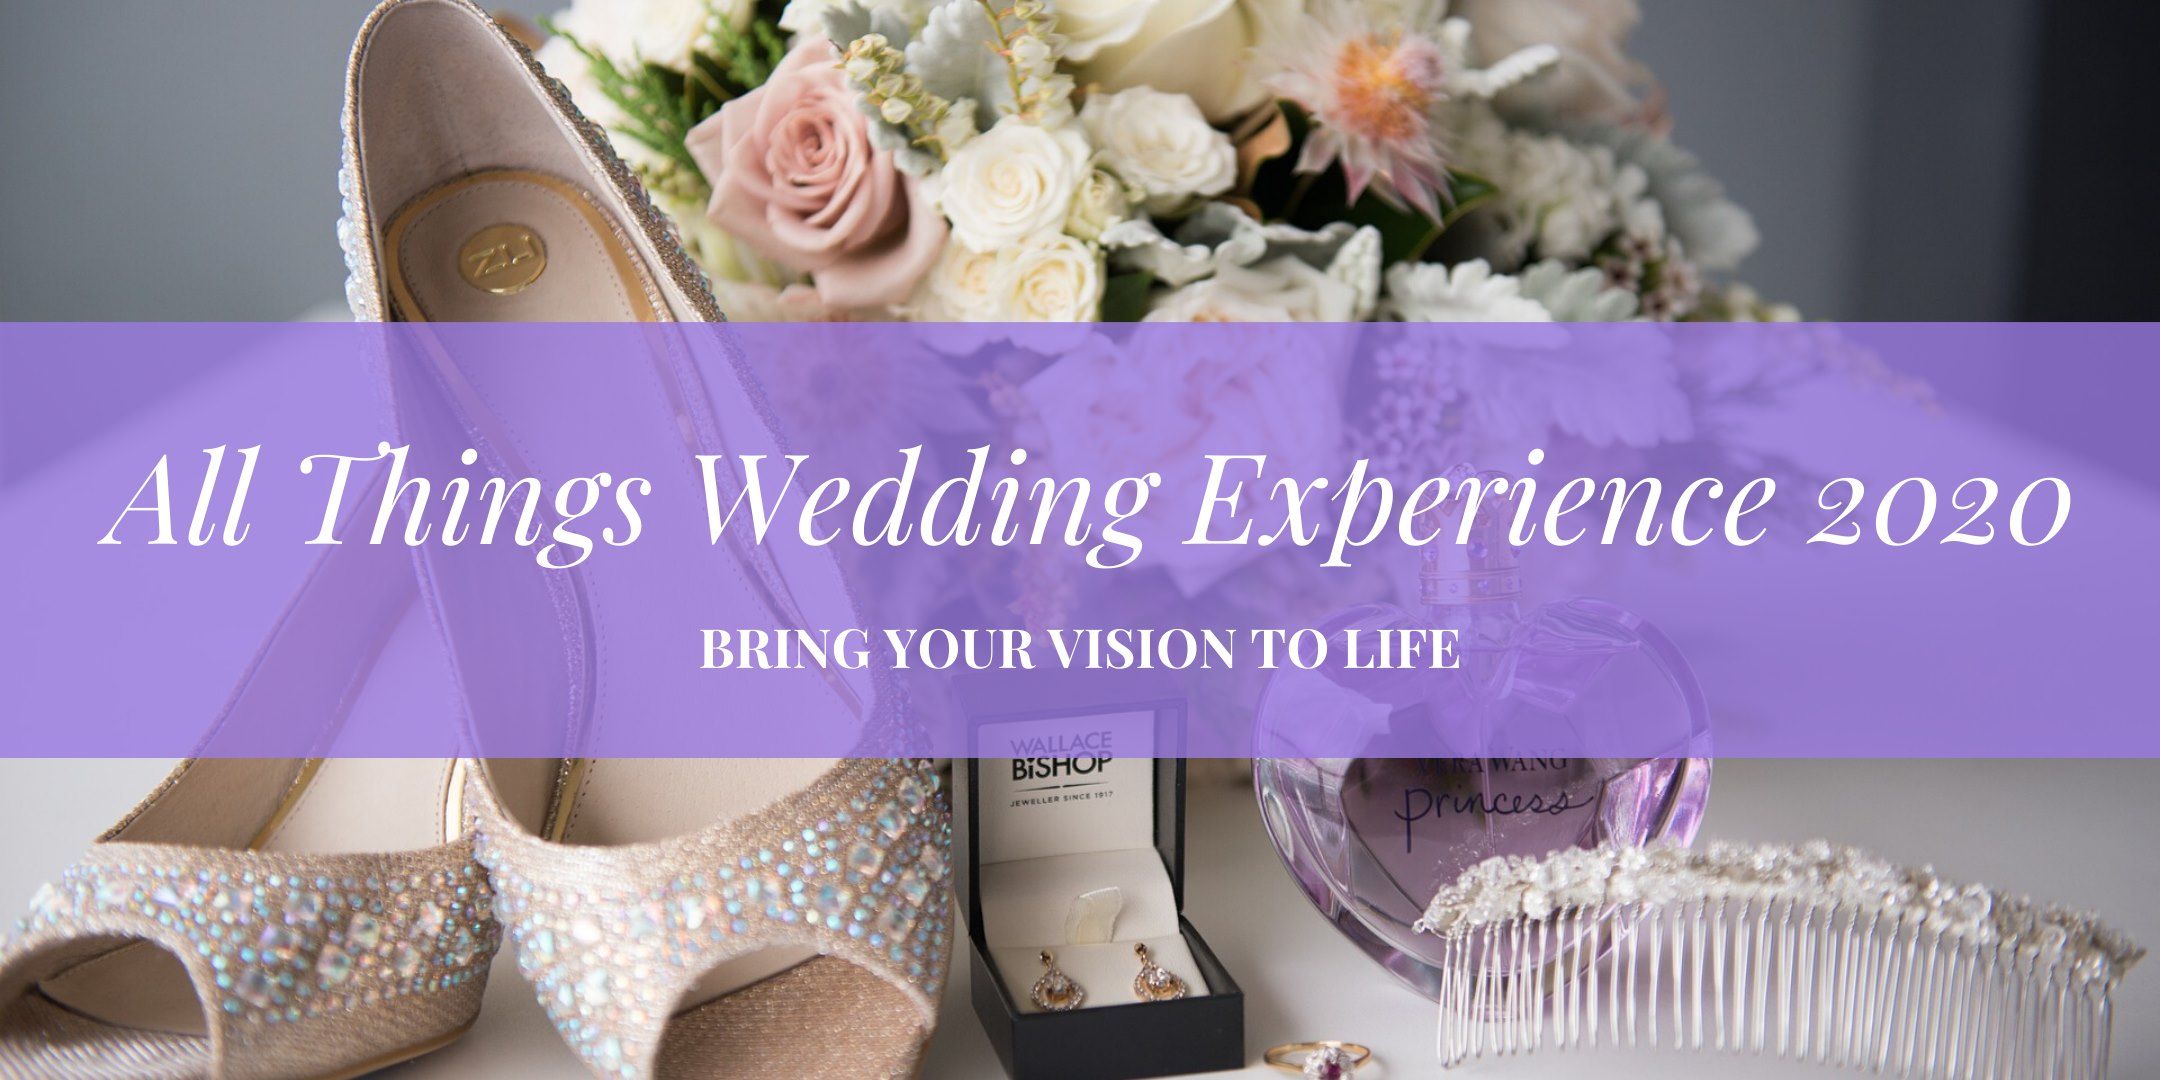 All Things Wedding Experience - March 2020